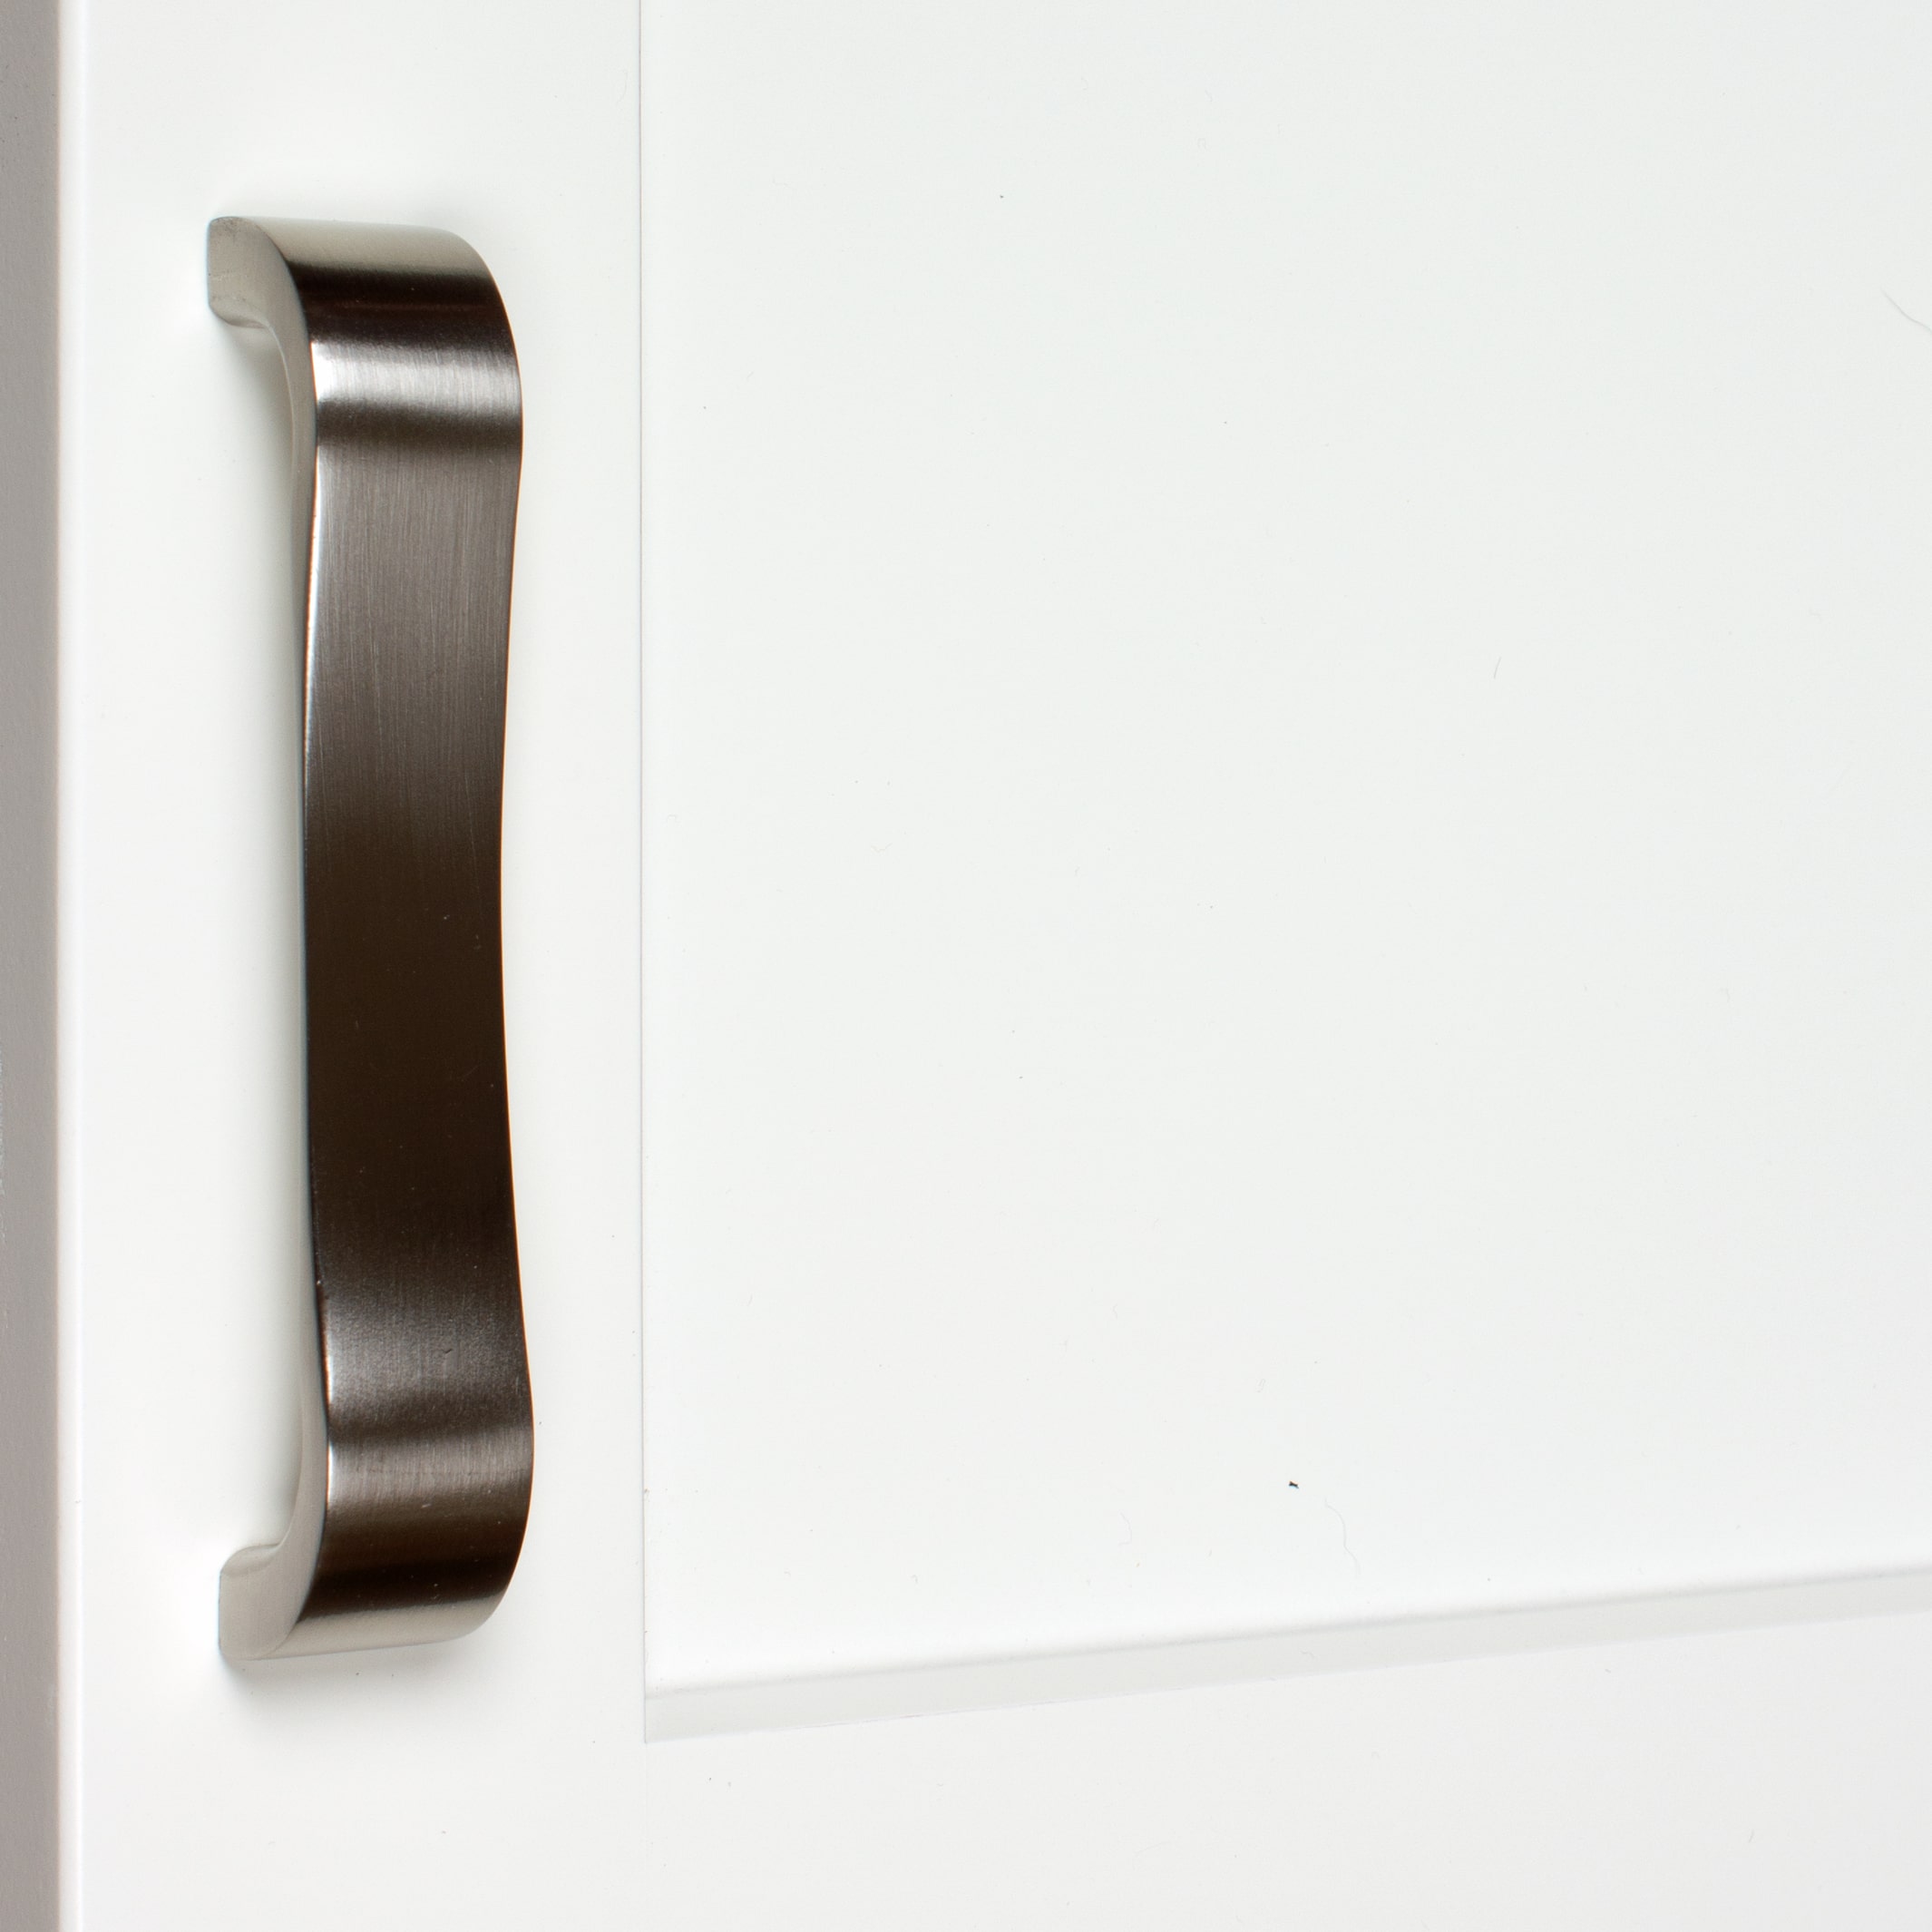 4-1/2 in. Center Smooth Curved Flat Cabinet Pull Handles, Satin Nickel, Pack of 10 - image 2 of 3